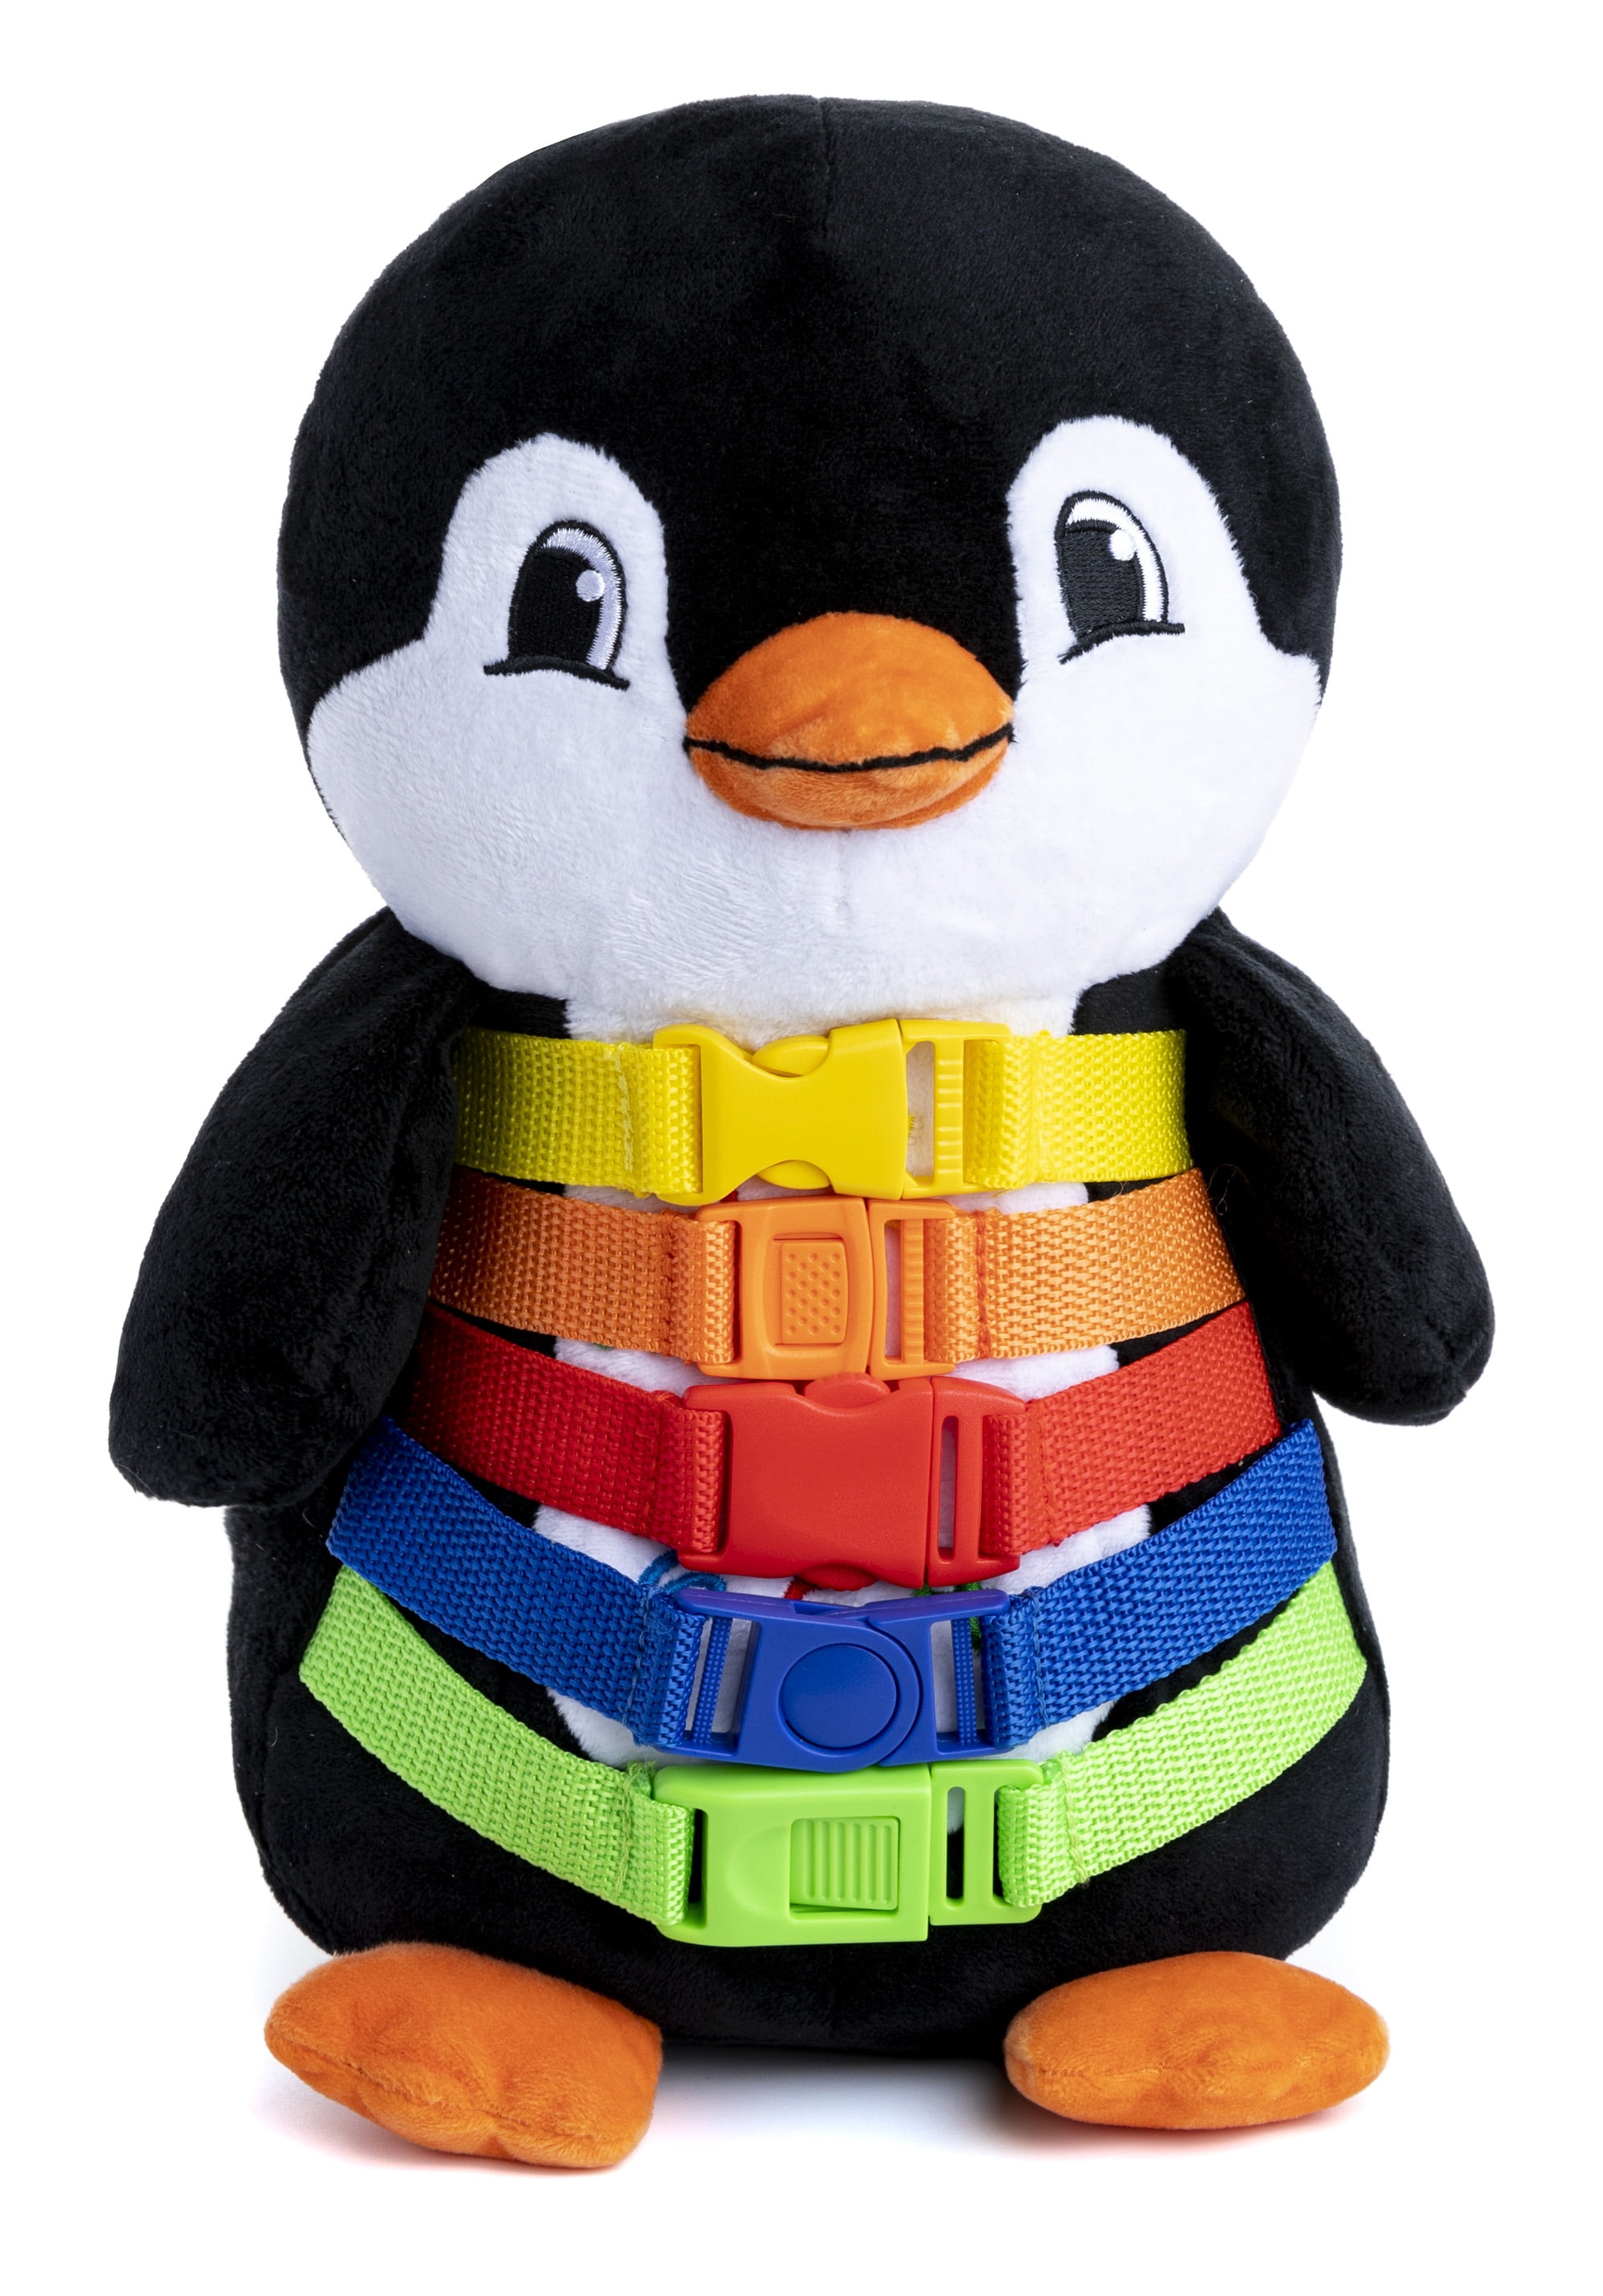 Buckle Toy - Blizzard Penguin - Learning Activity Toy for Toddlers 